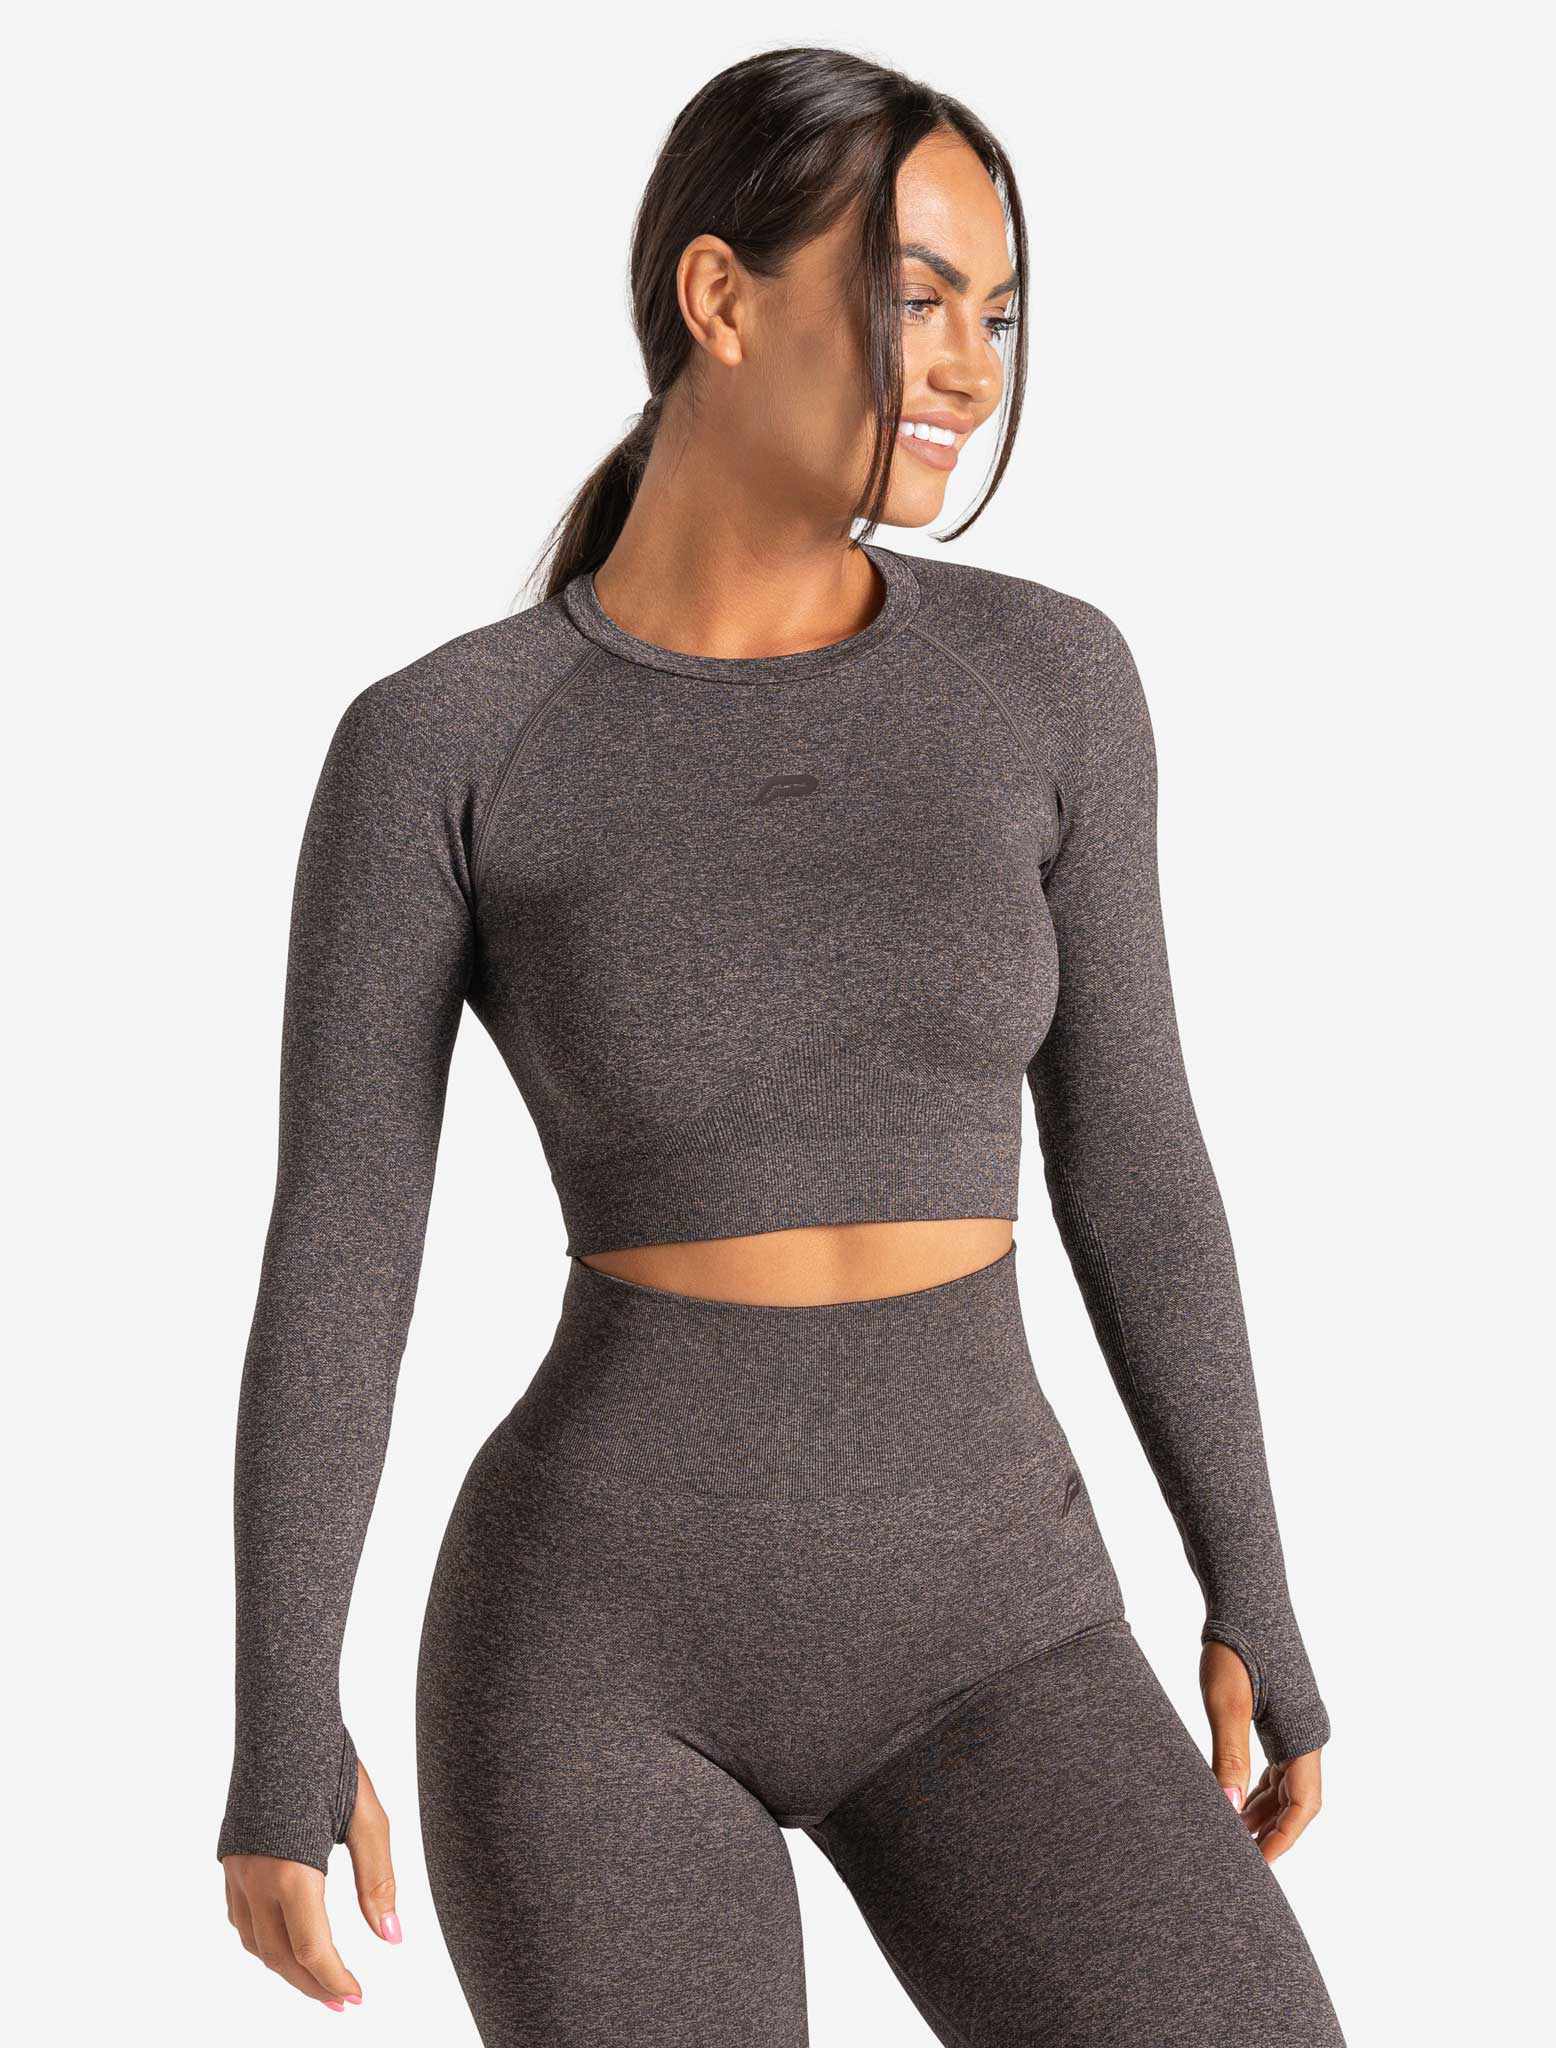 Core Seamless Long Sleeve Crop Top / Brown Marl Pursue Fitness 7